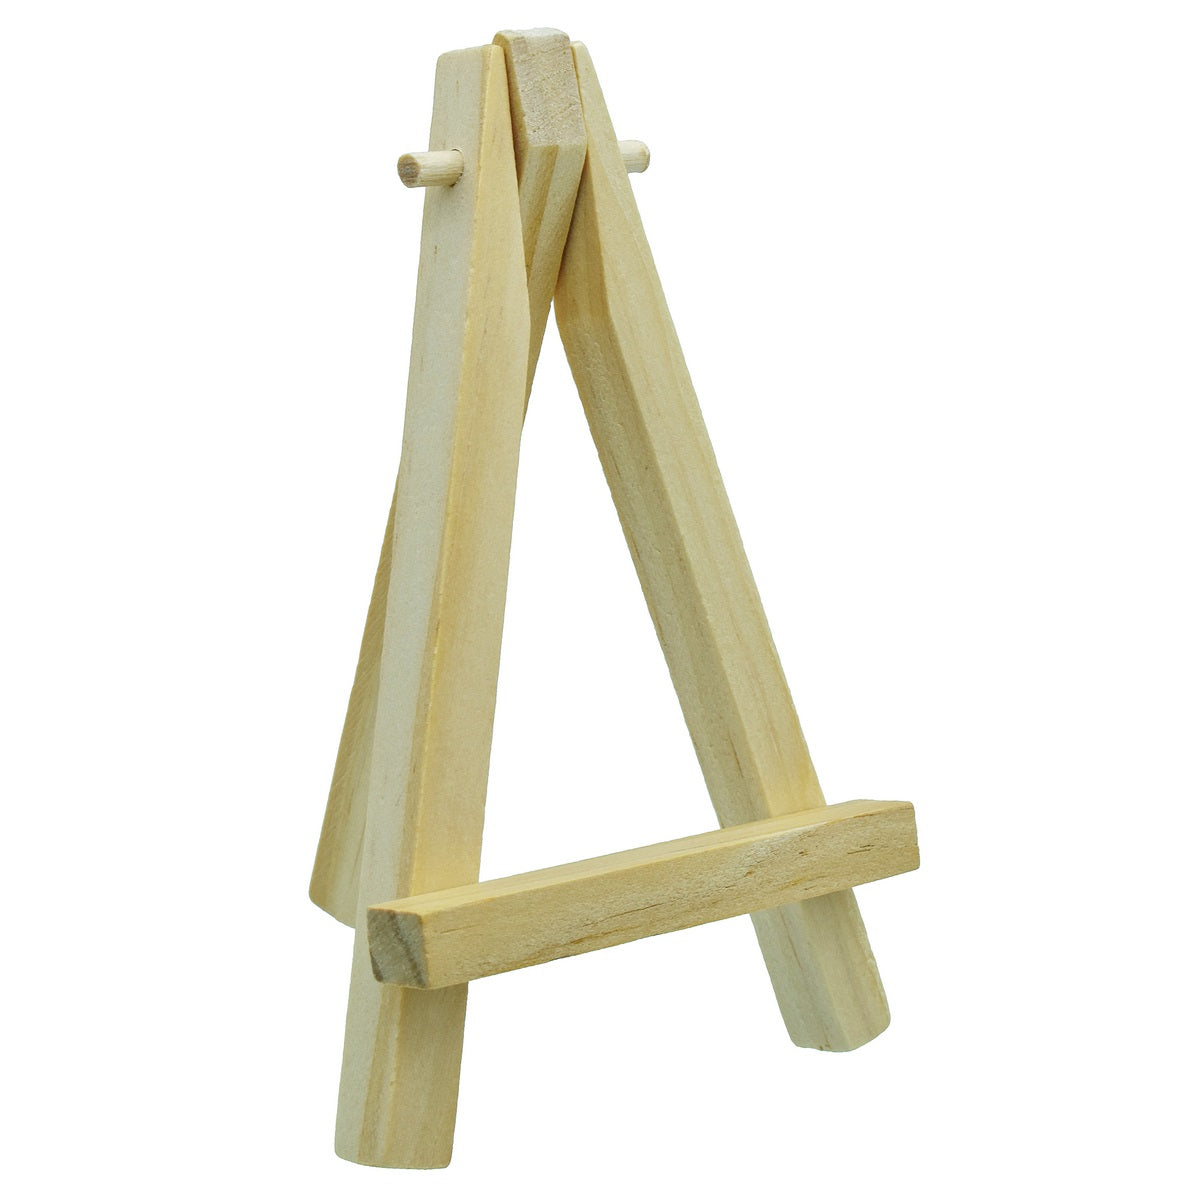 jags-mumbai Easel Wooden Easel Stand